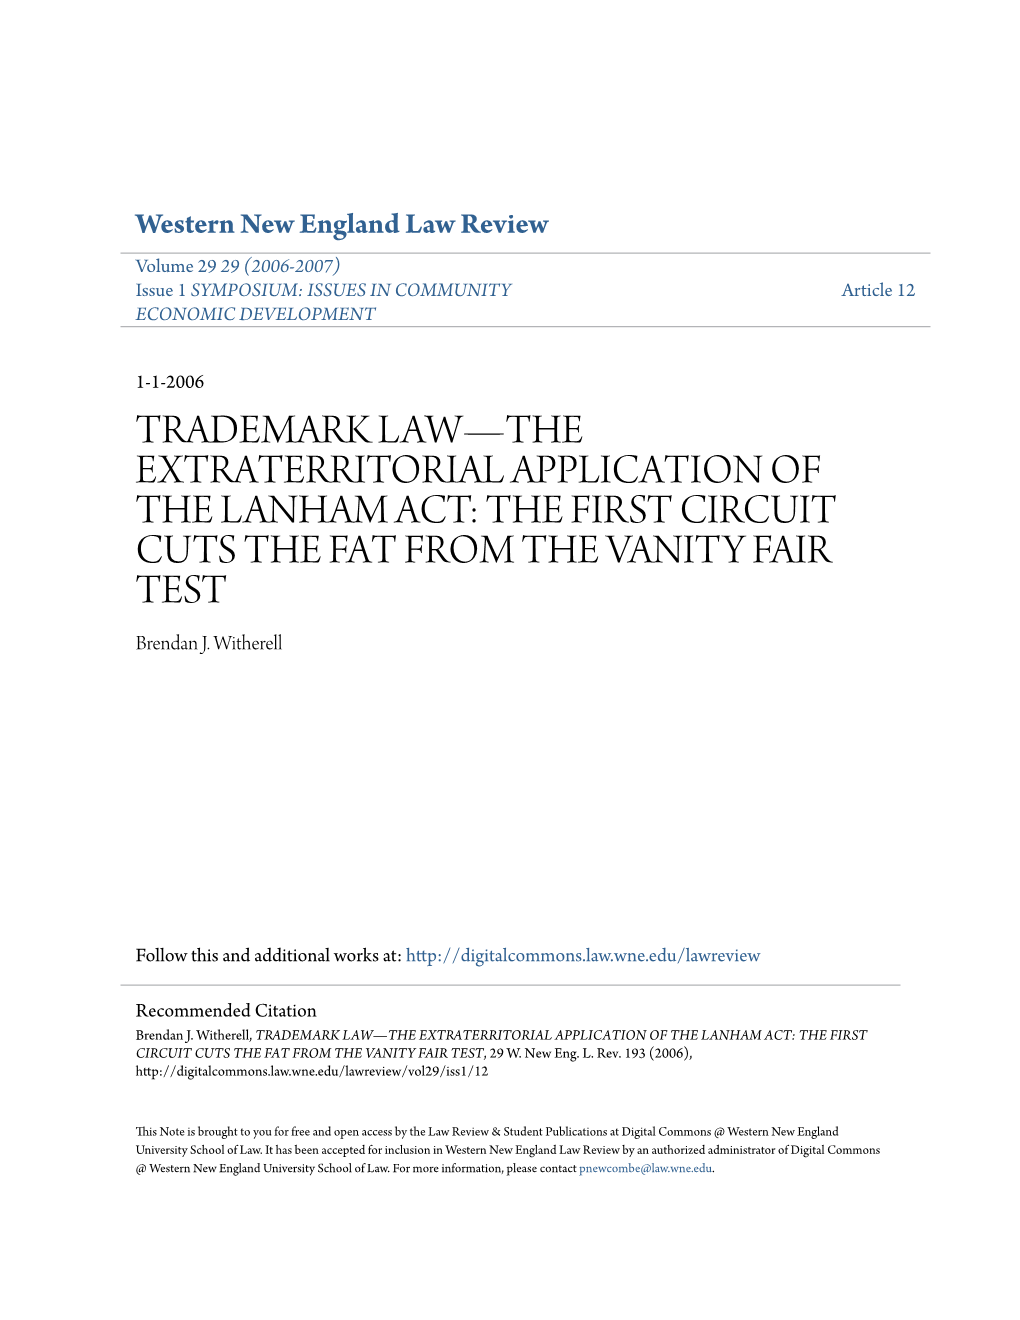 TRADEMARK LAW—THE EXTRATERRITORIAL APPLICATION of the LANHAM ACT: the FIRST CIRCUIT CUTS the FAT from the VANITY FAIR TEST Brendan J